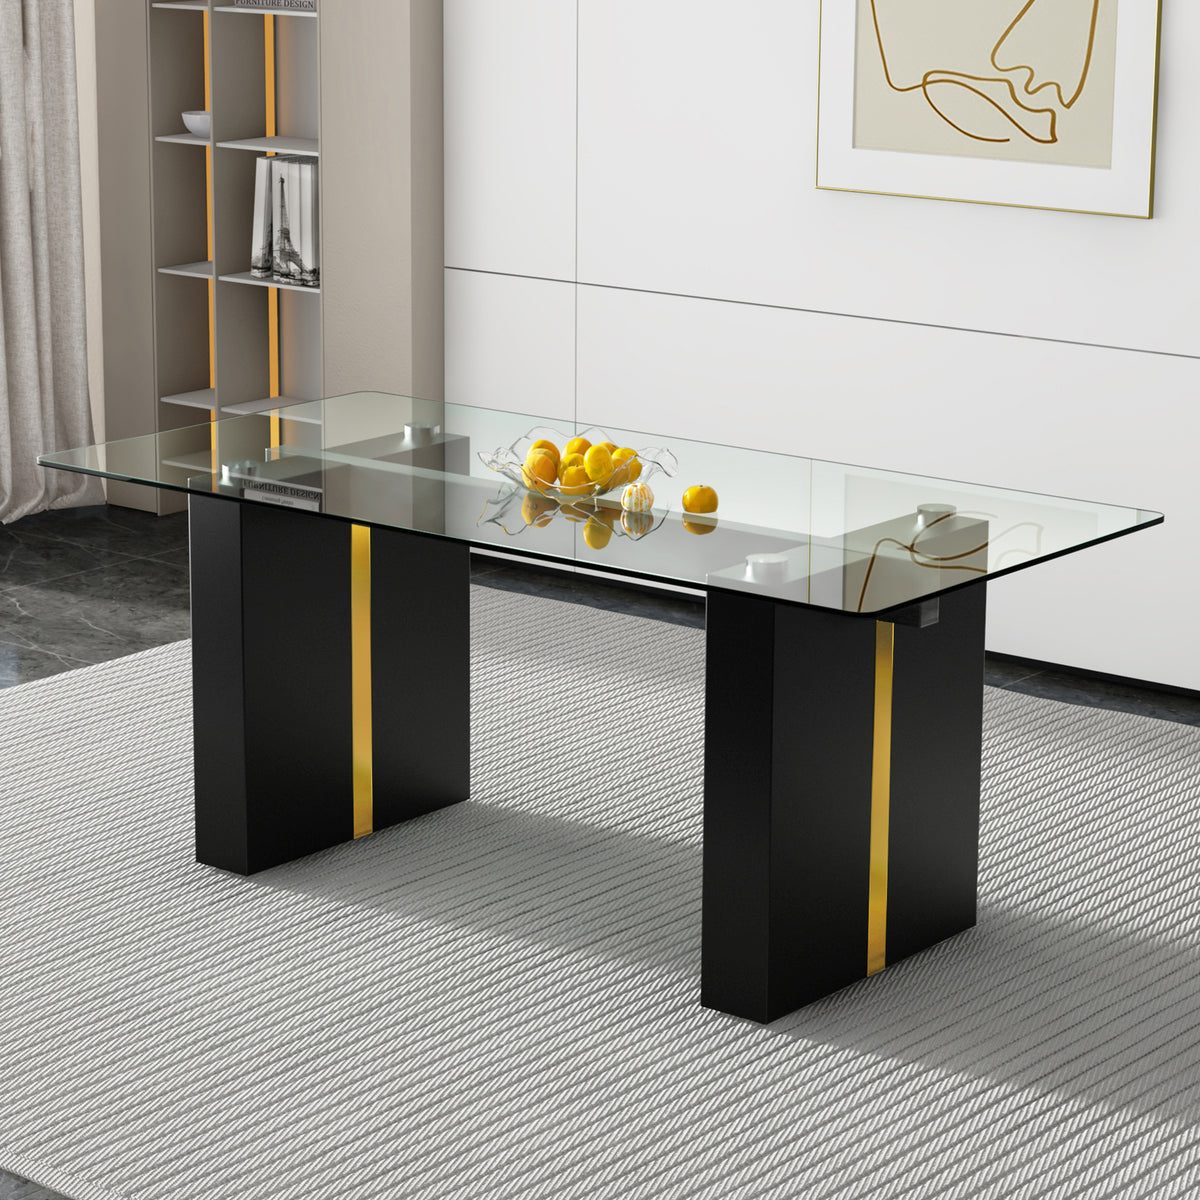 Modern Glass Table for 6-8 people - Black and Gold